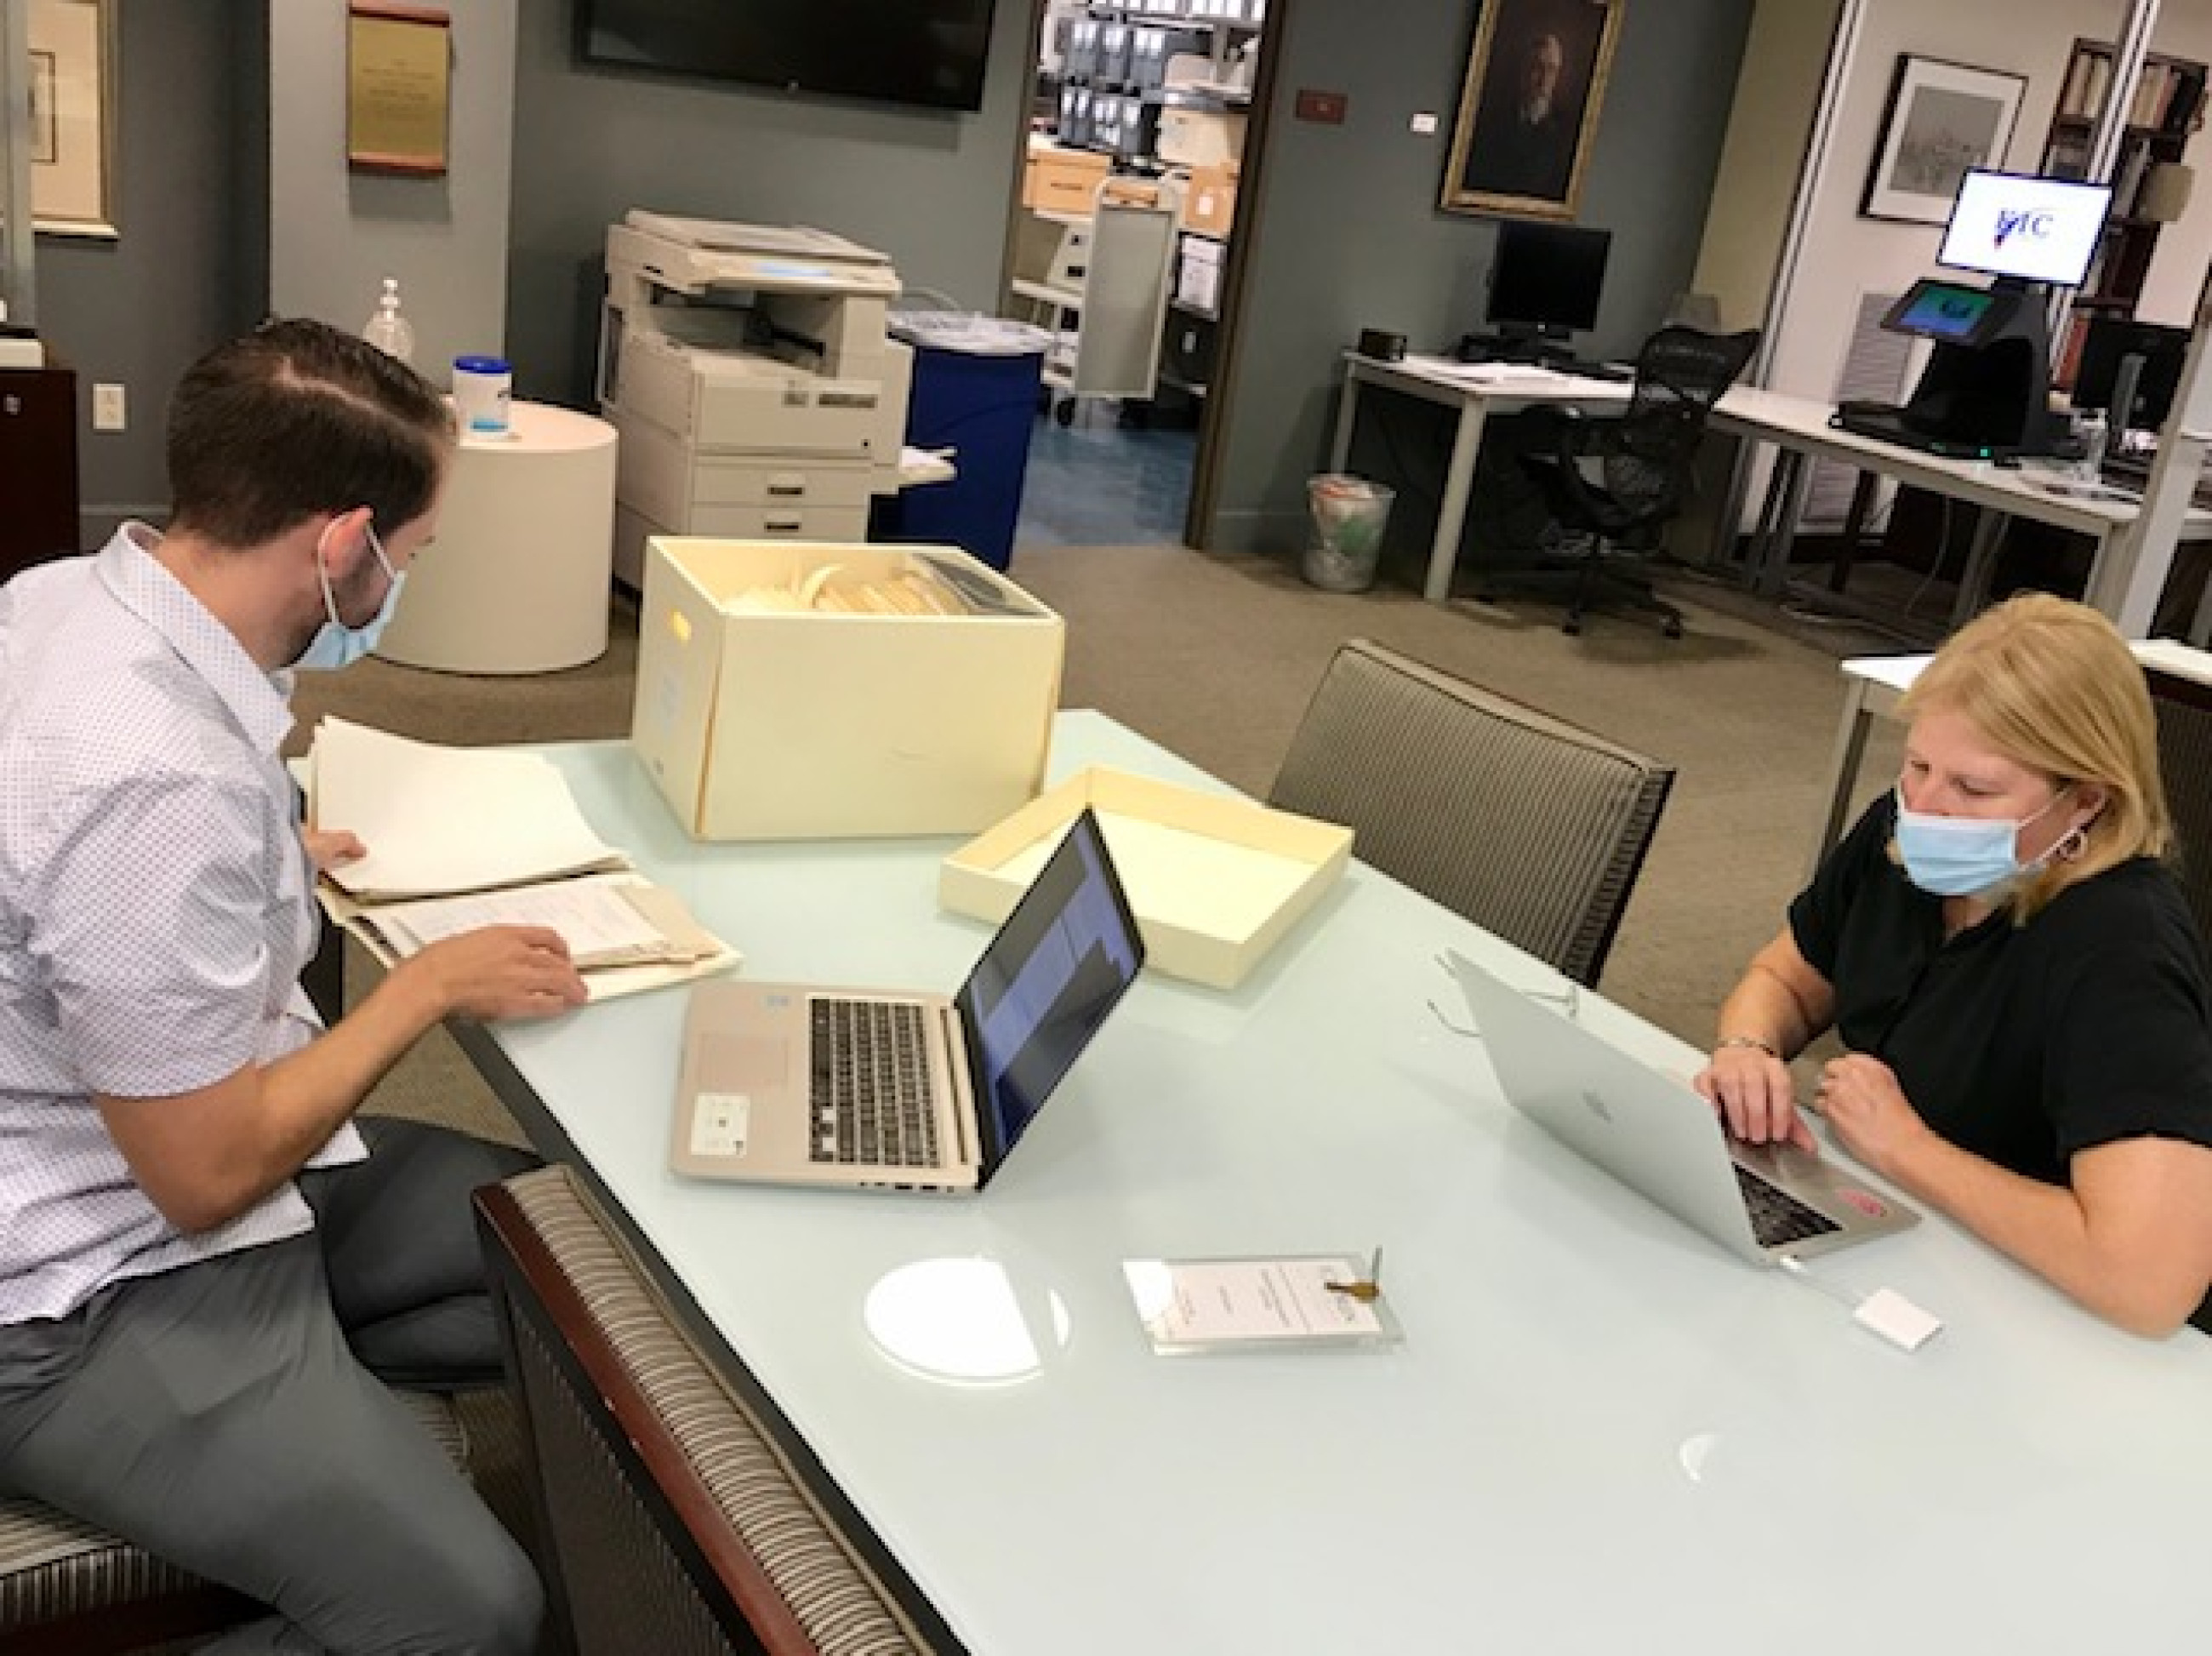 Historians Dr. Will Jones and Dr. Melissa Kean conducting research in support of the Rice University Task Force on Slavery, Segregation, and Racial Injustice